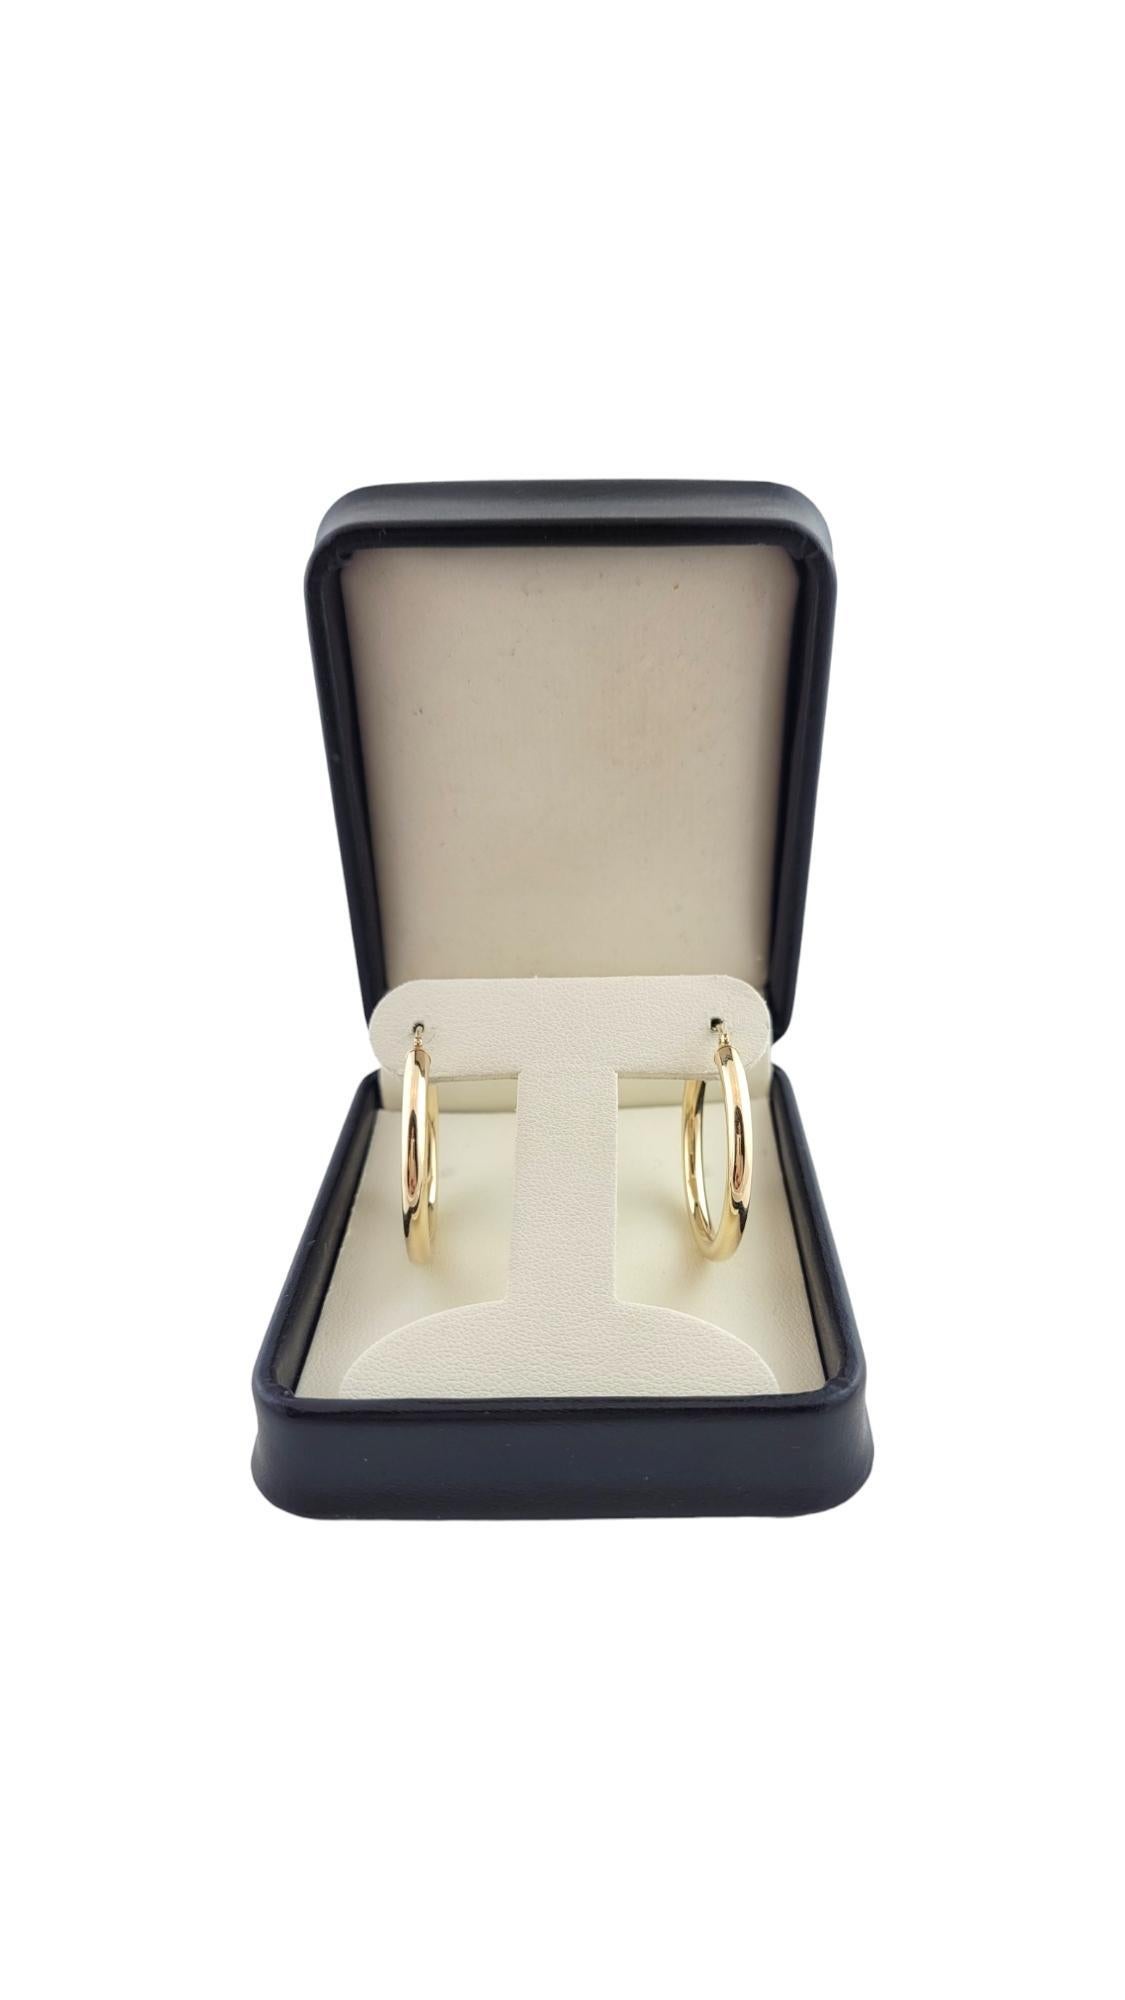 14K Yellow Gold Round Hoop Earrings #16061 For Sale 1